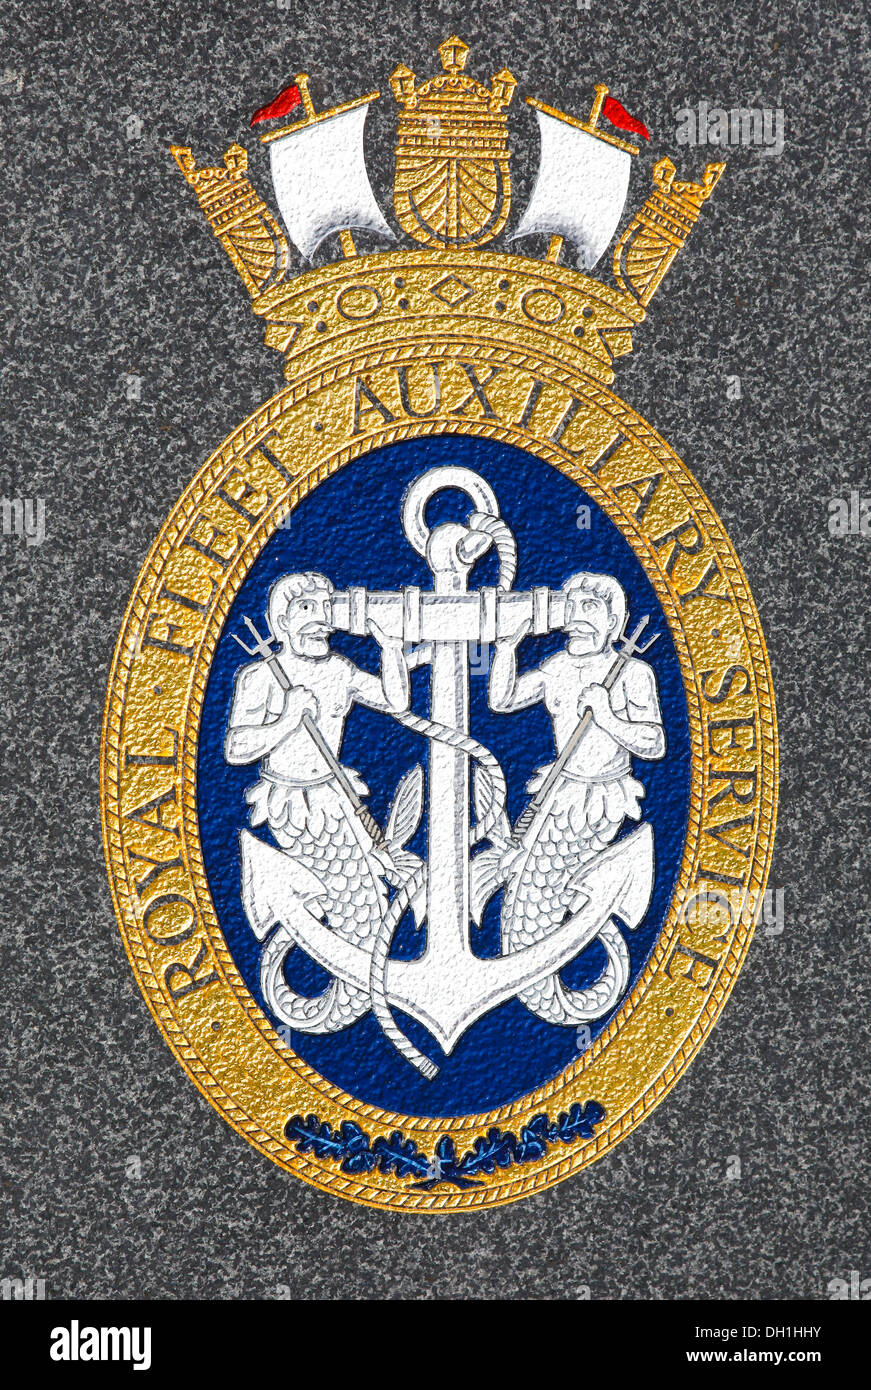 The Royal Fleet Auxiliary Service crest, badge or coat of arms at the The National Memorial Arboretum, Alrewas, near Lichfield, England, UK Stock Photo